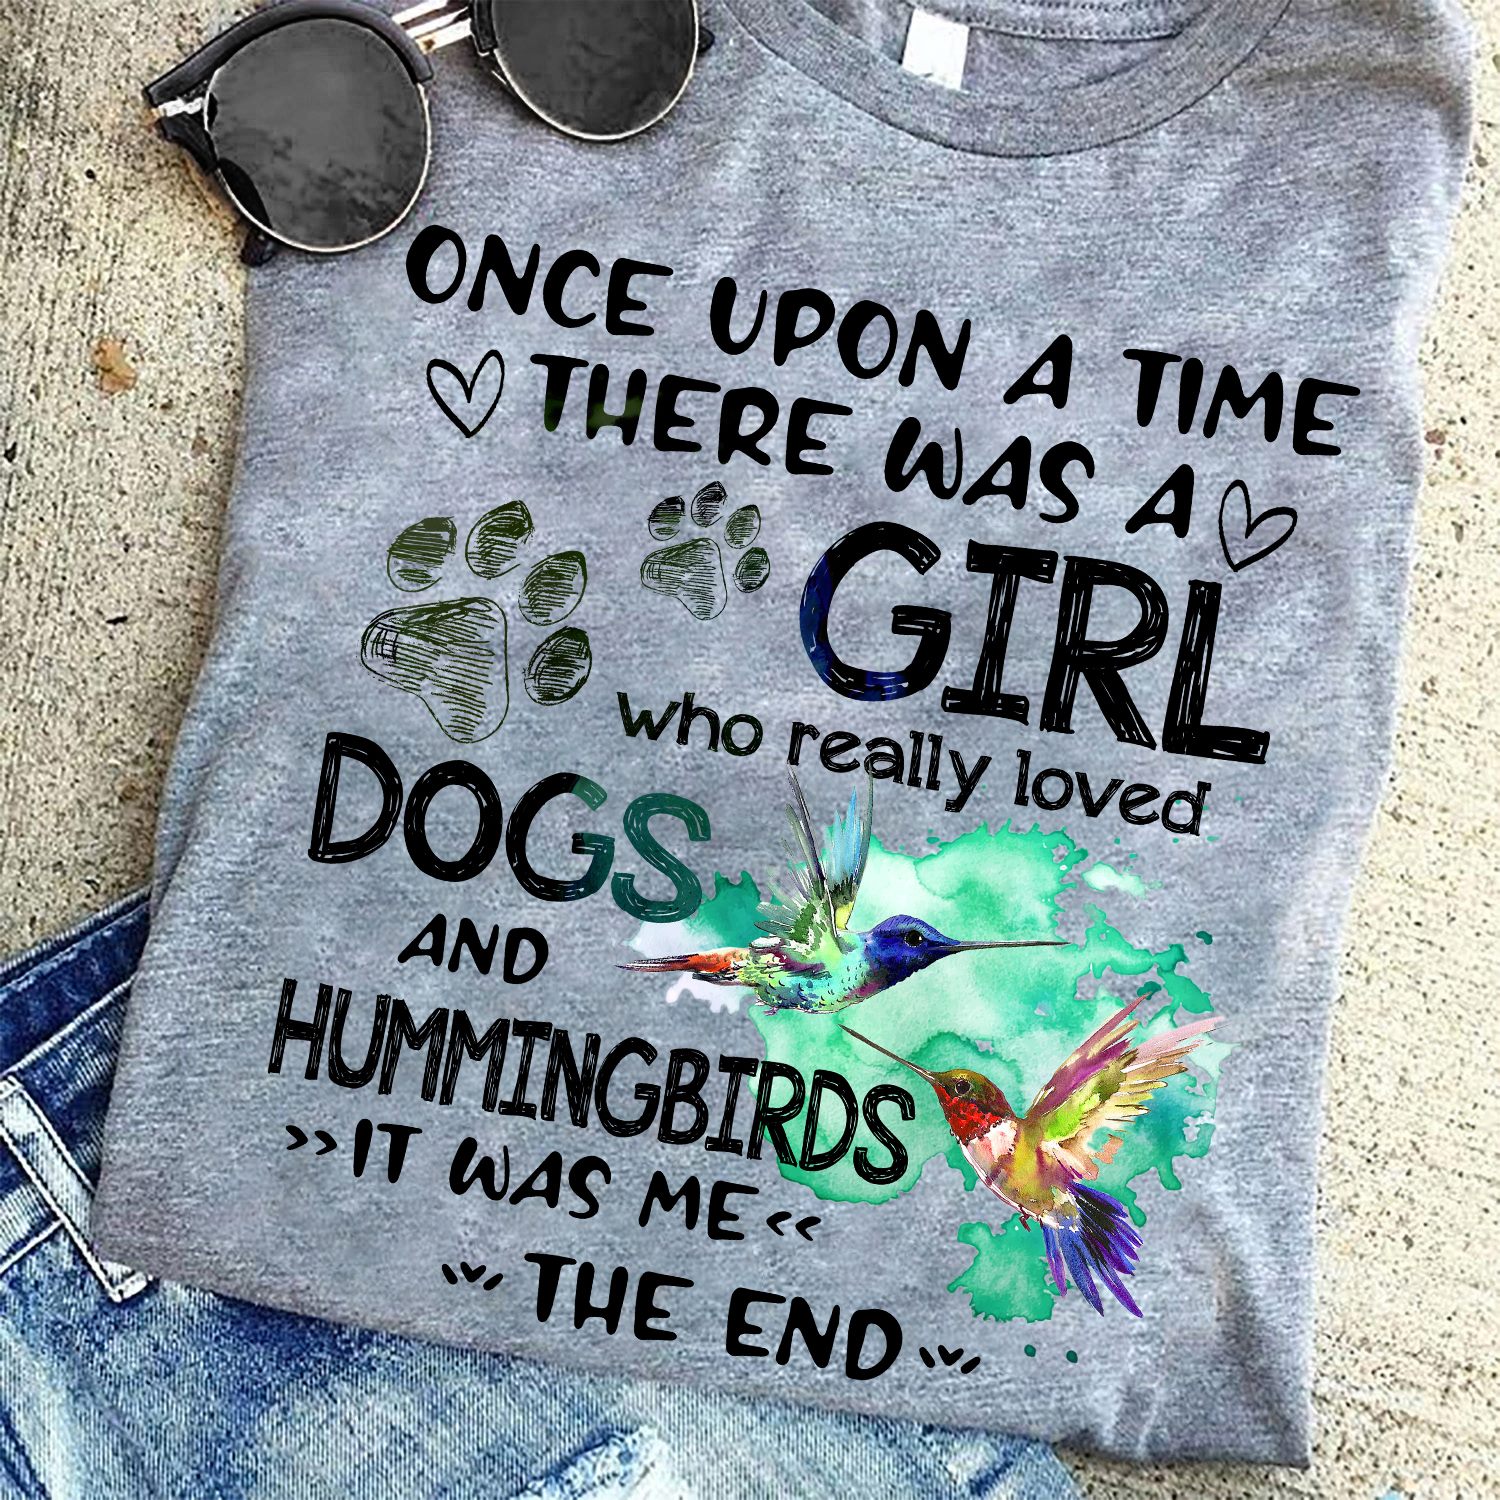 Once upon a time there was a girl who really loved dogs and hummingbirds